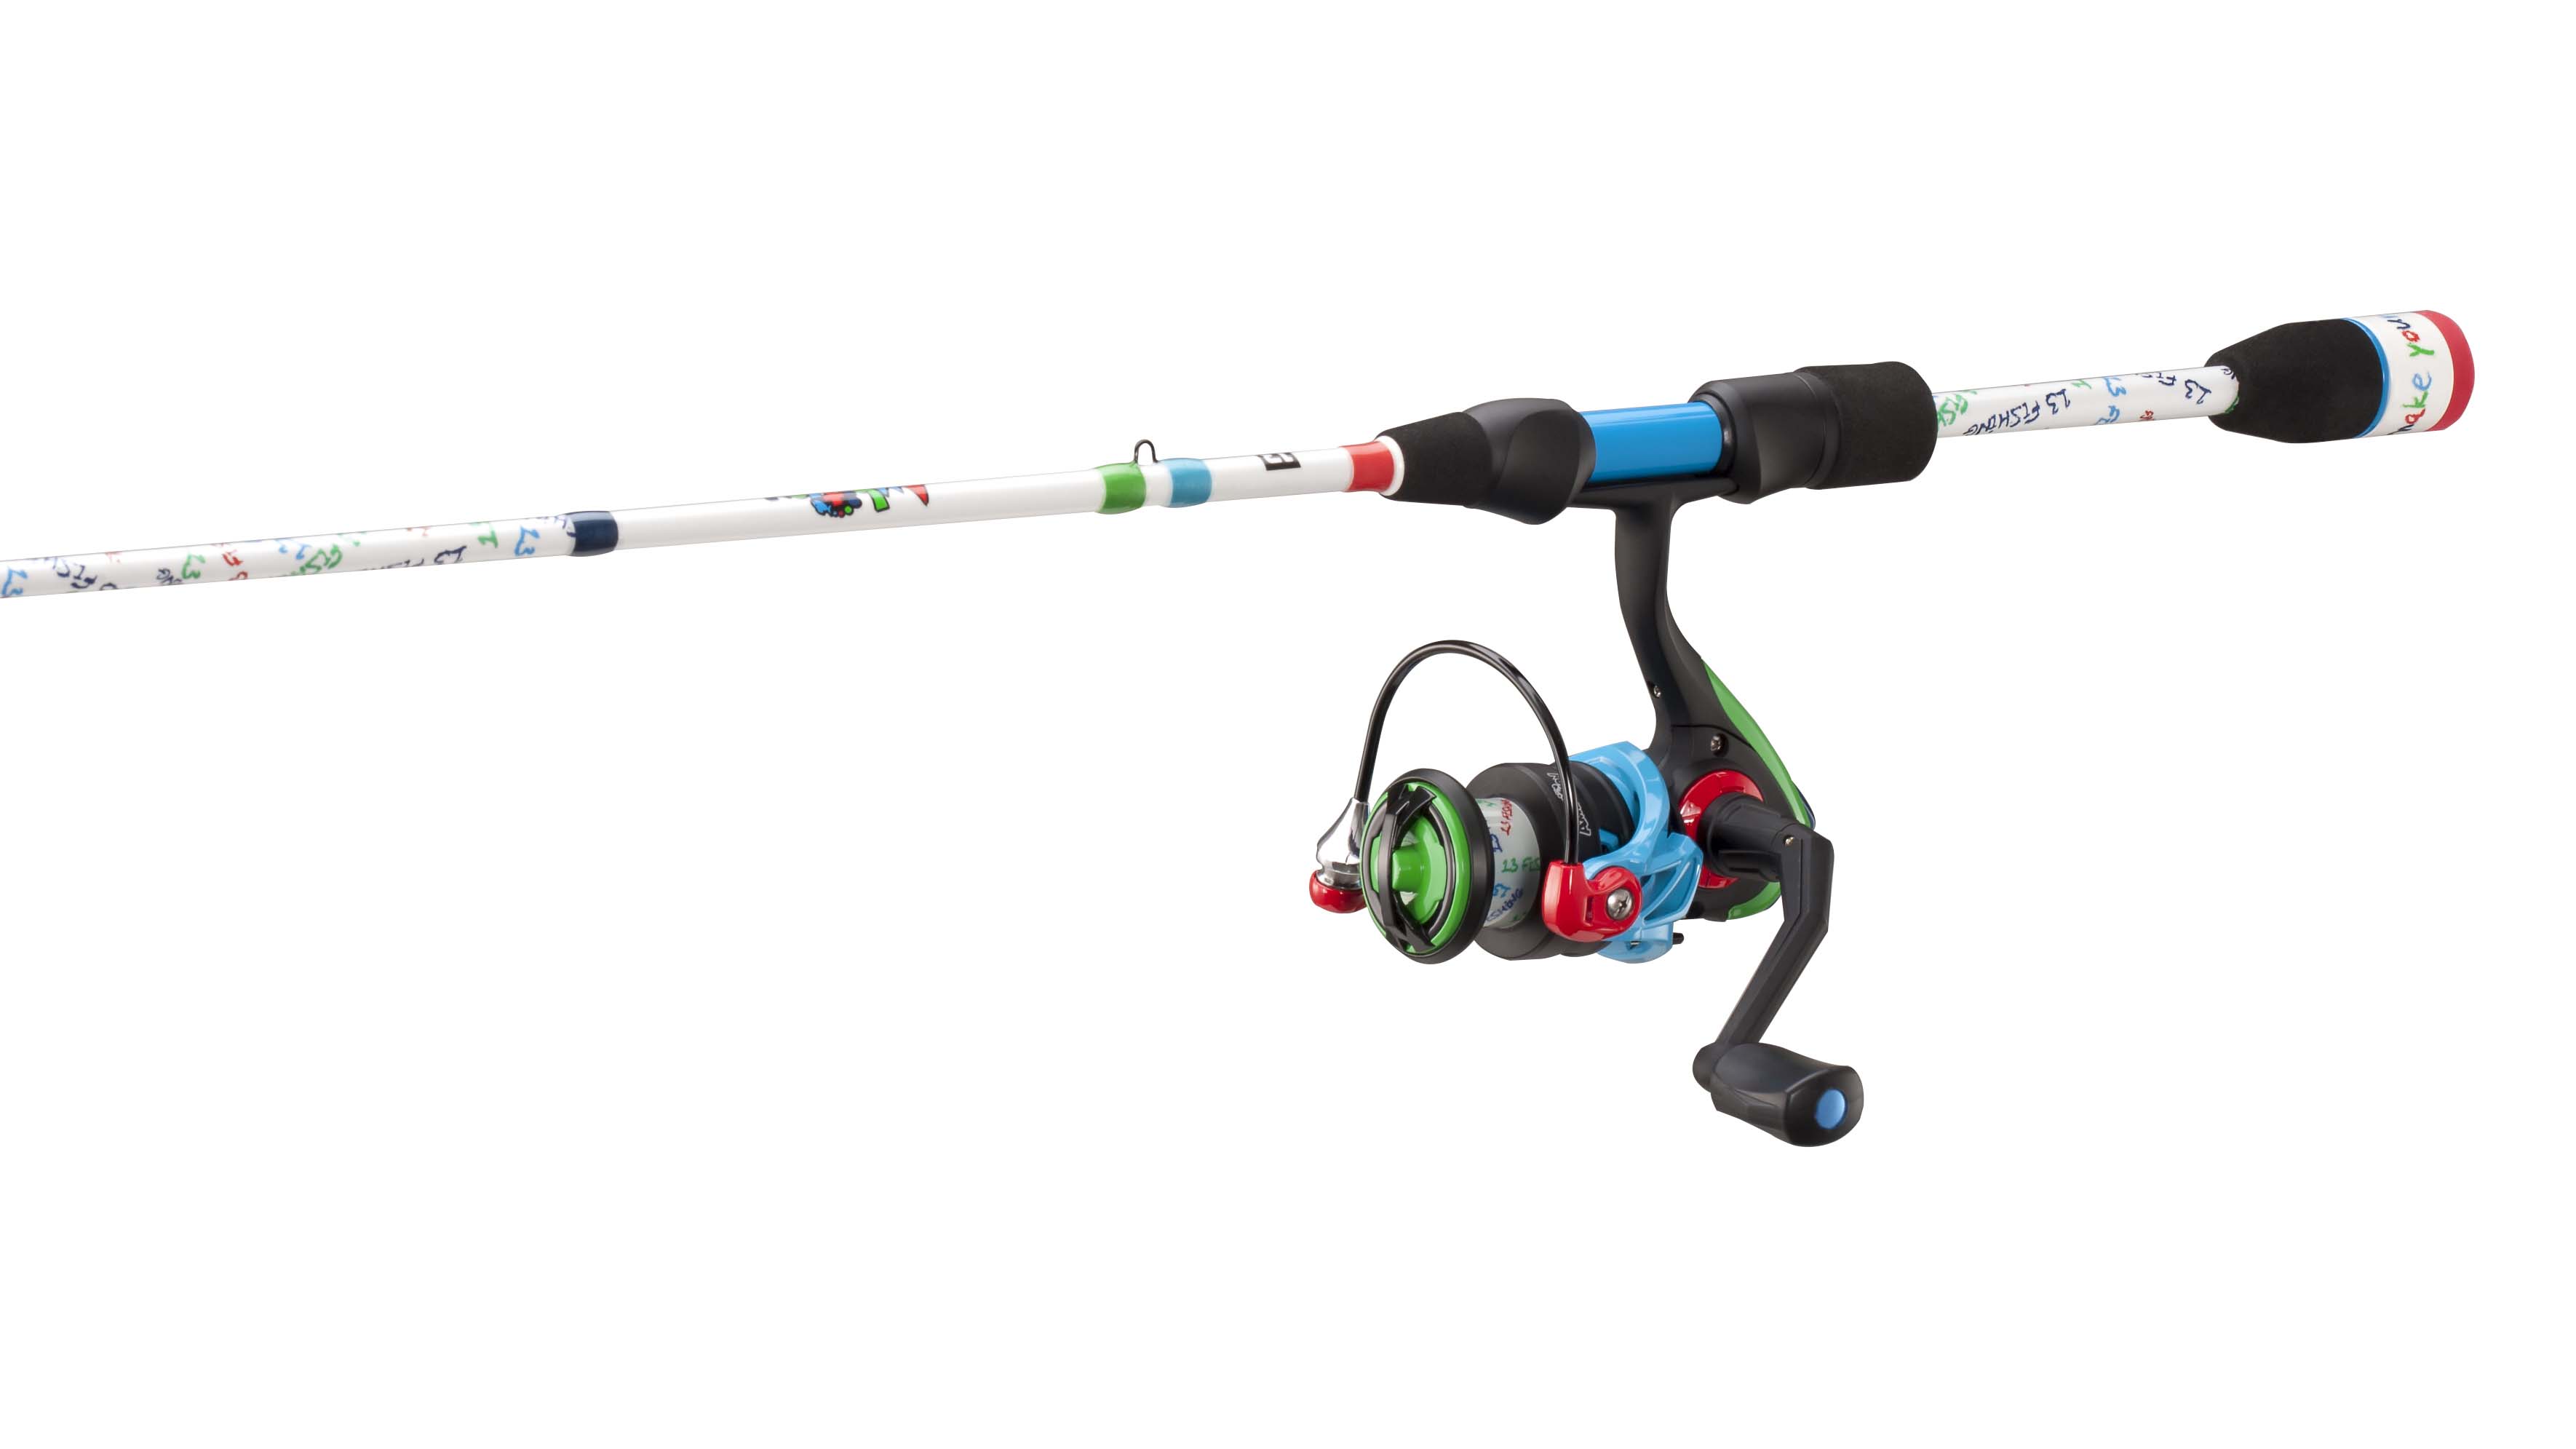 https://cs1.0ps.us/original/opplanet-13-fishing-ambition-ul-spinning-combo-1000-size-reel-fast-action-fresh-crayon-5ft6in-a4-sc56ul-main